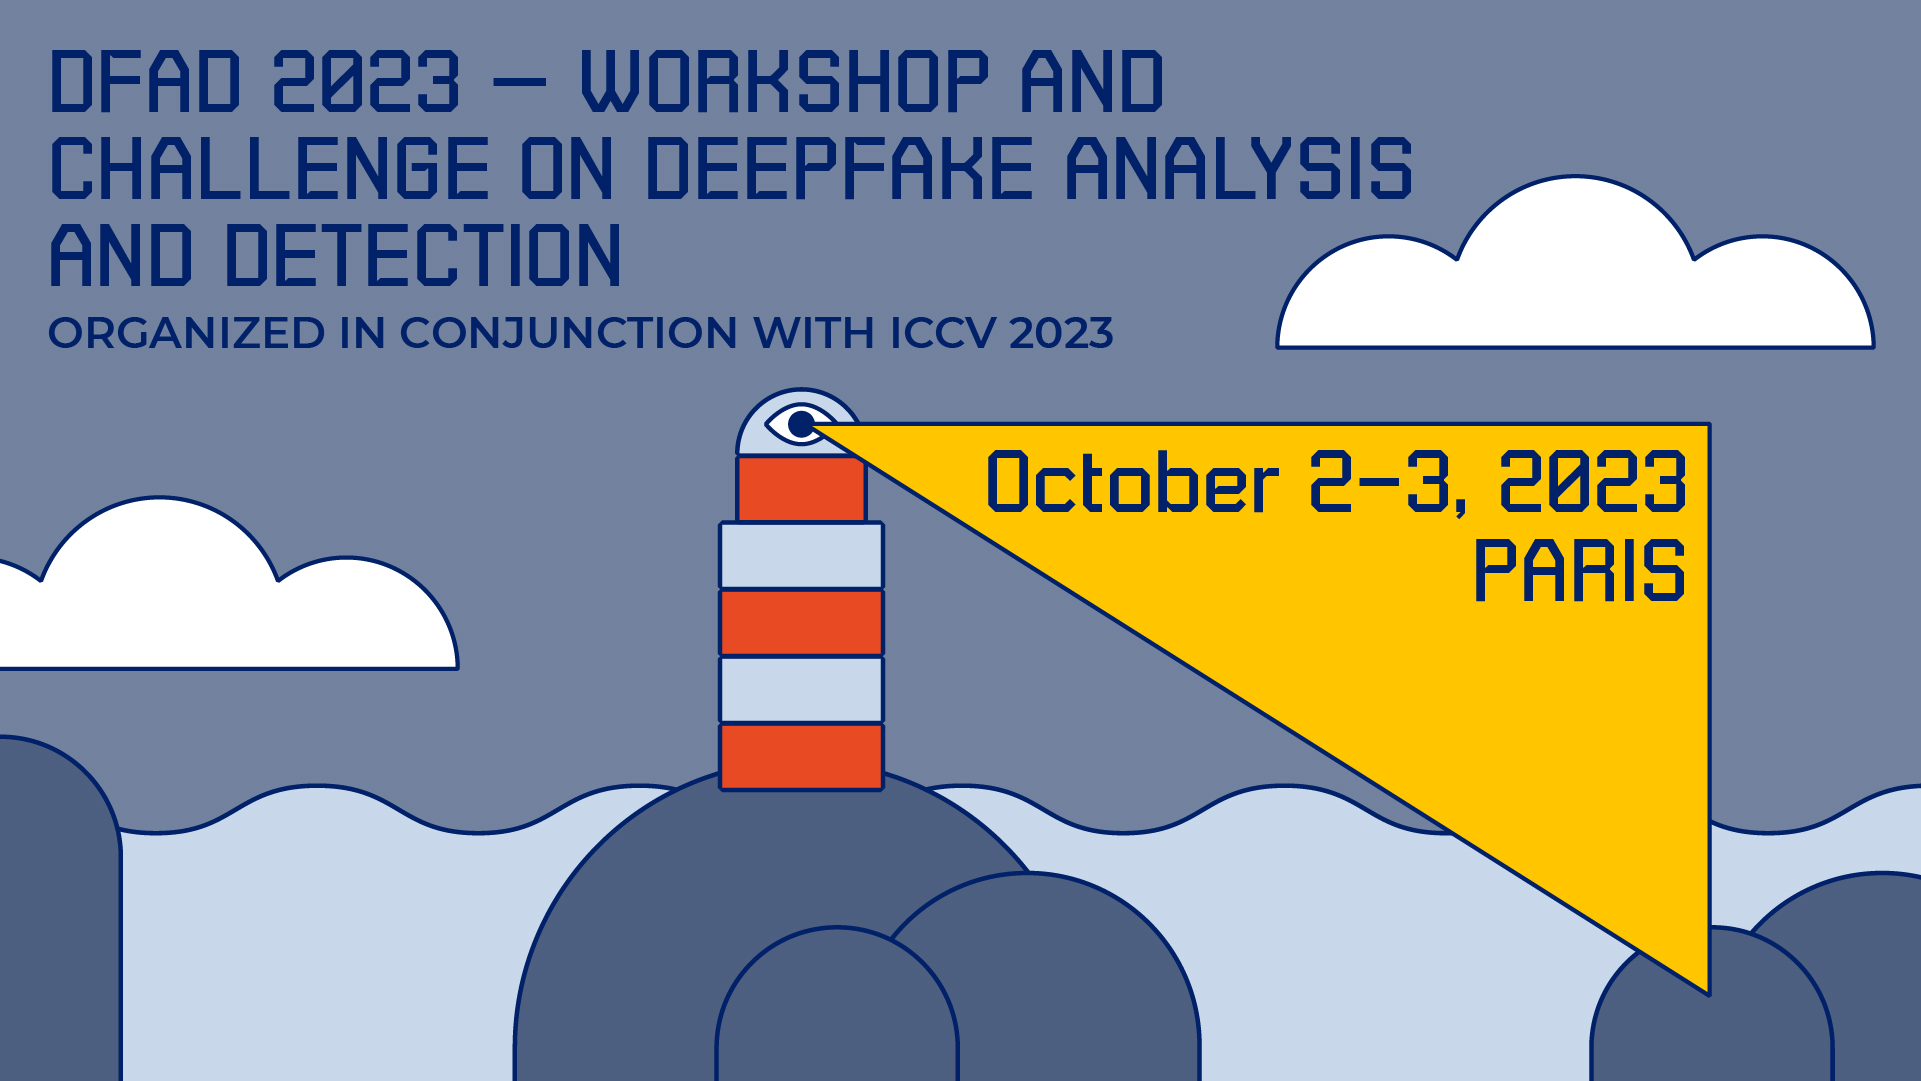 Workshop and Challenge on Deepfake Analysis and Detection